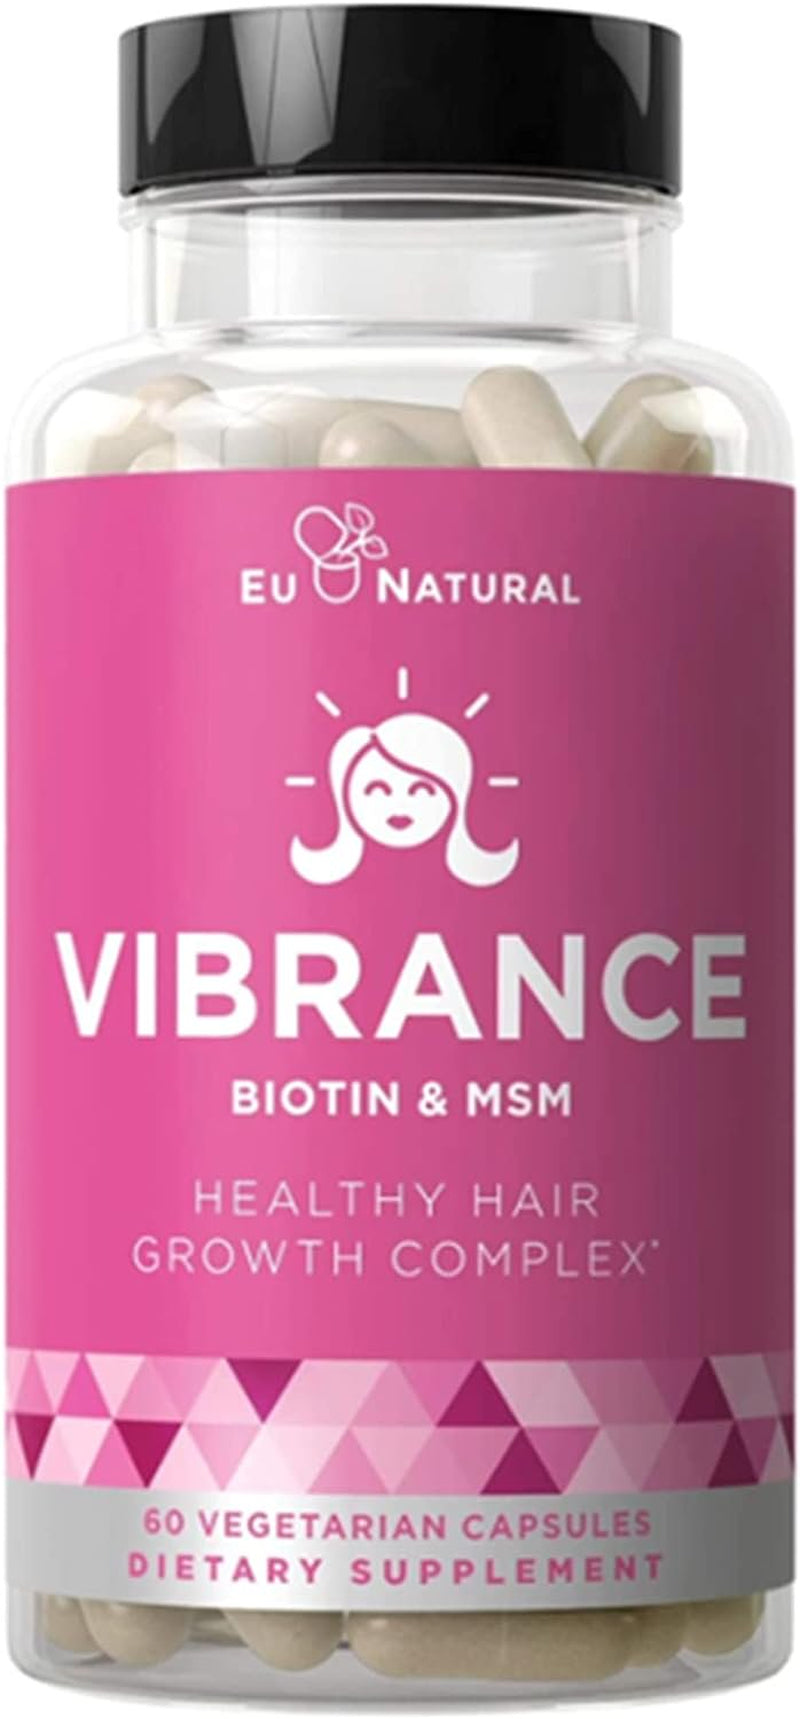 Vibrance Hair Growth Vitamins for Women – Grow Hair Faster, Healthier, and Stronger with Potent Multiblend of Biotin & Optimsm – Supports Thicker, Shinier Hair & Regrowth – 60 Vegetarian Soft Capsules